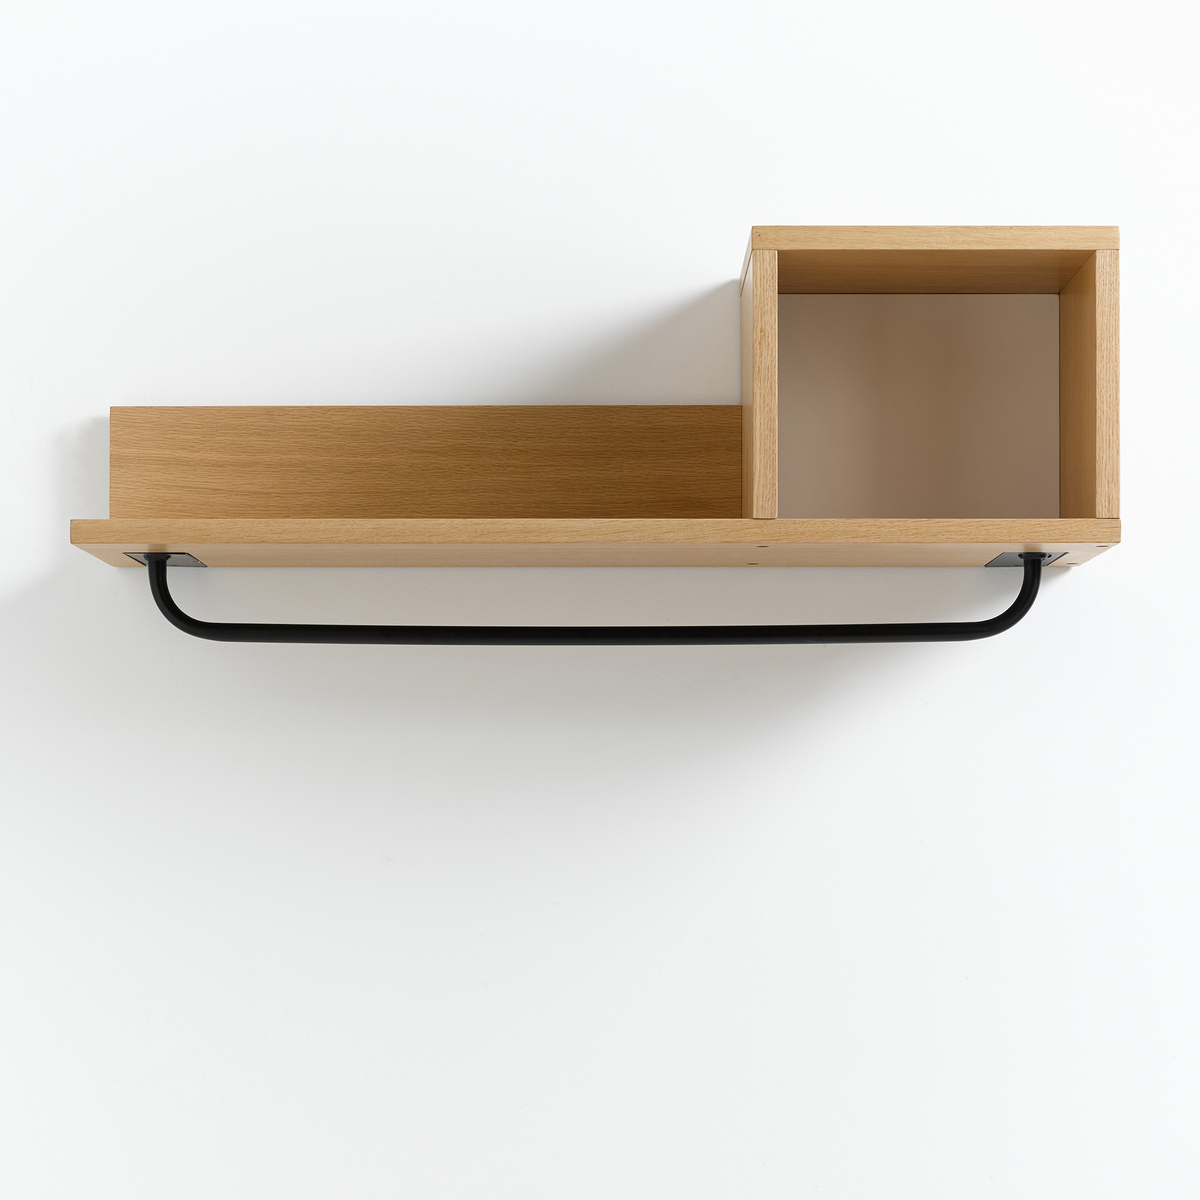 Jimi Hanger and Shelf Unit with Storage Compartment